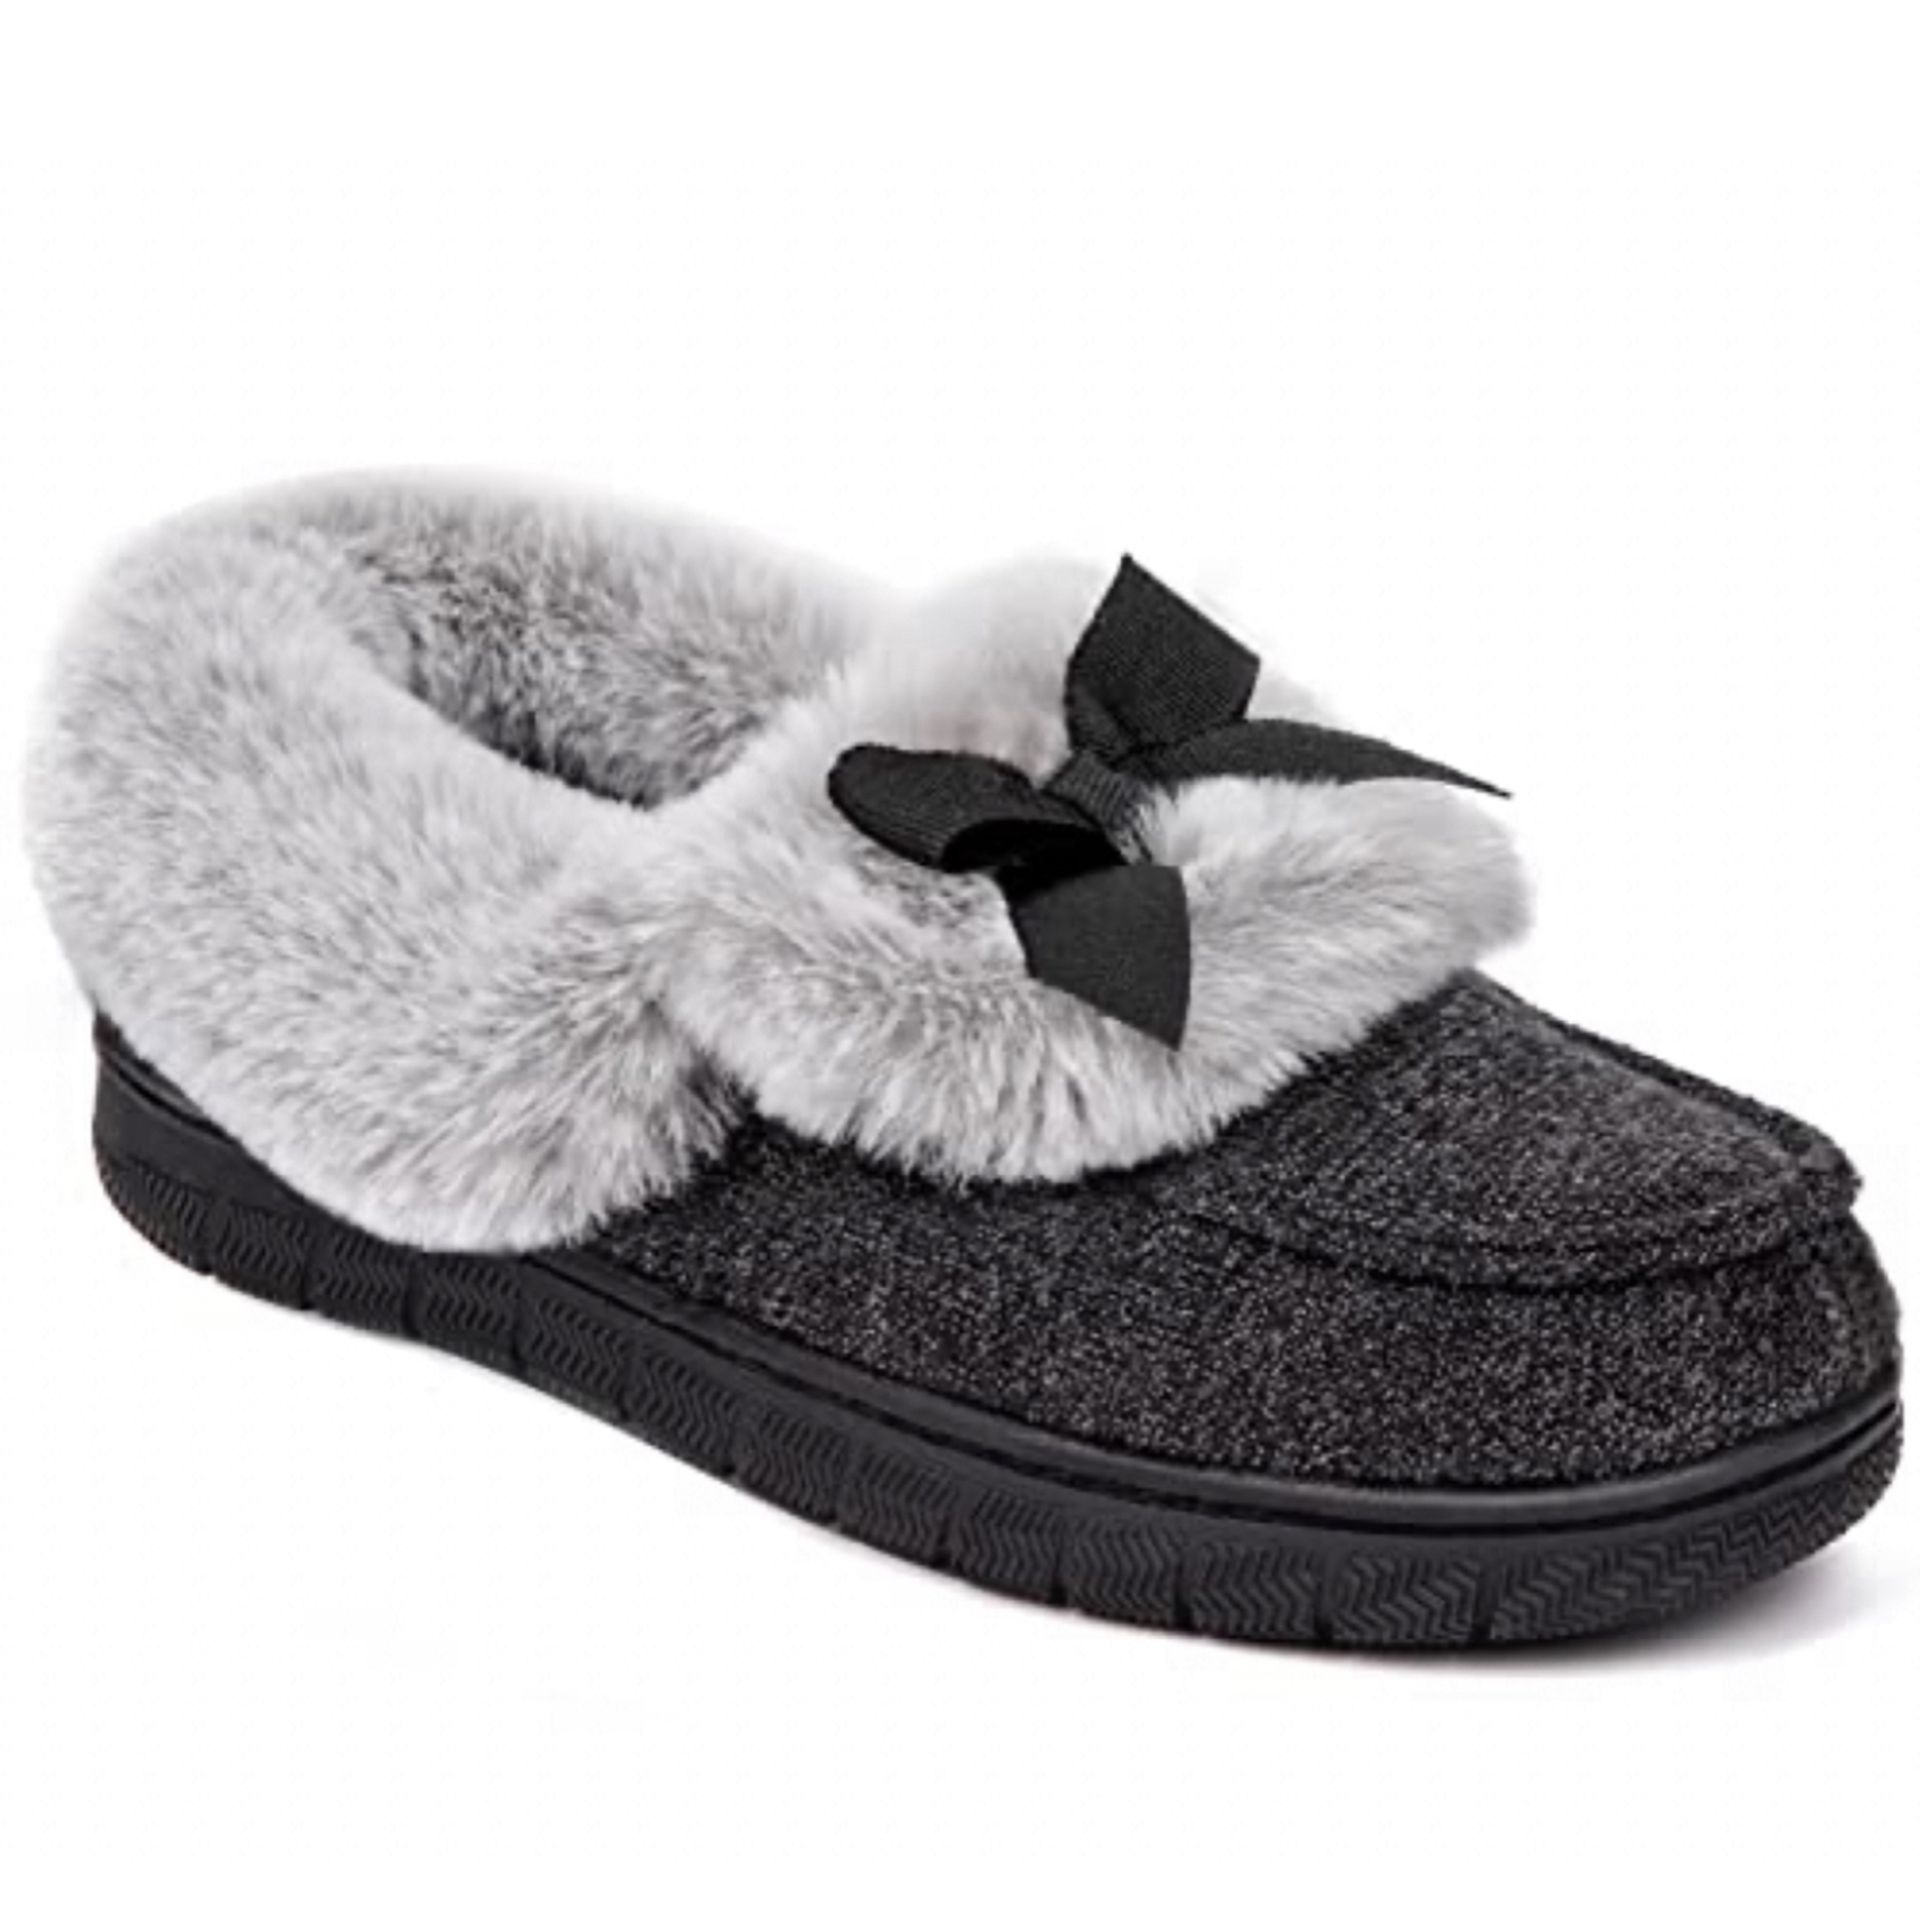 RRP £18.99 VeraCosy Women's Knitted Fluffy Memory Foam Warm Slippers with Bow, 9 UK